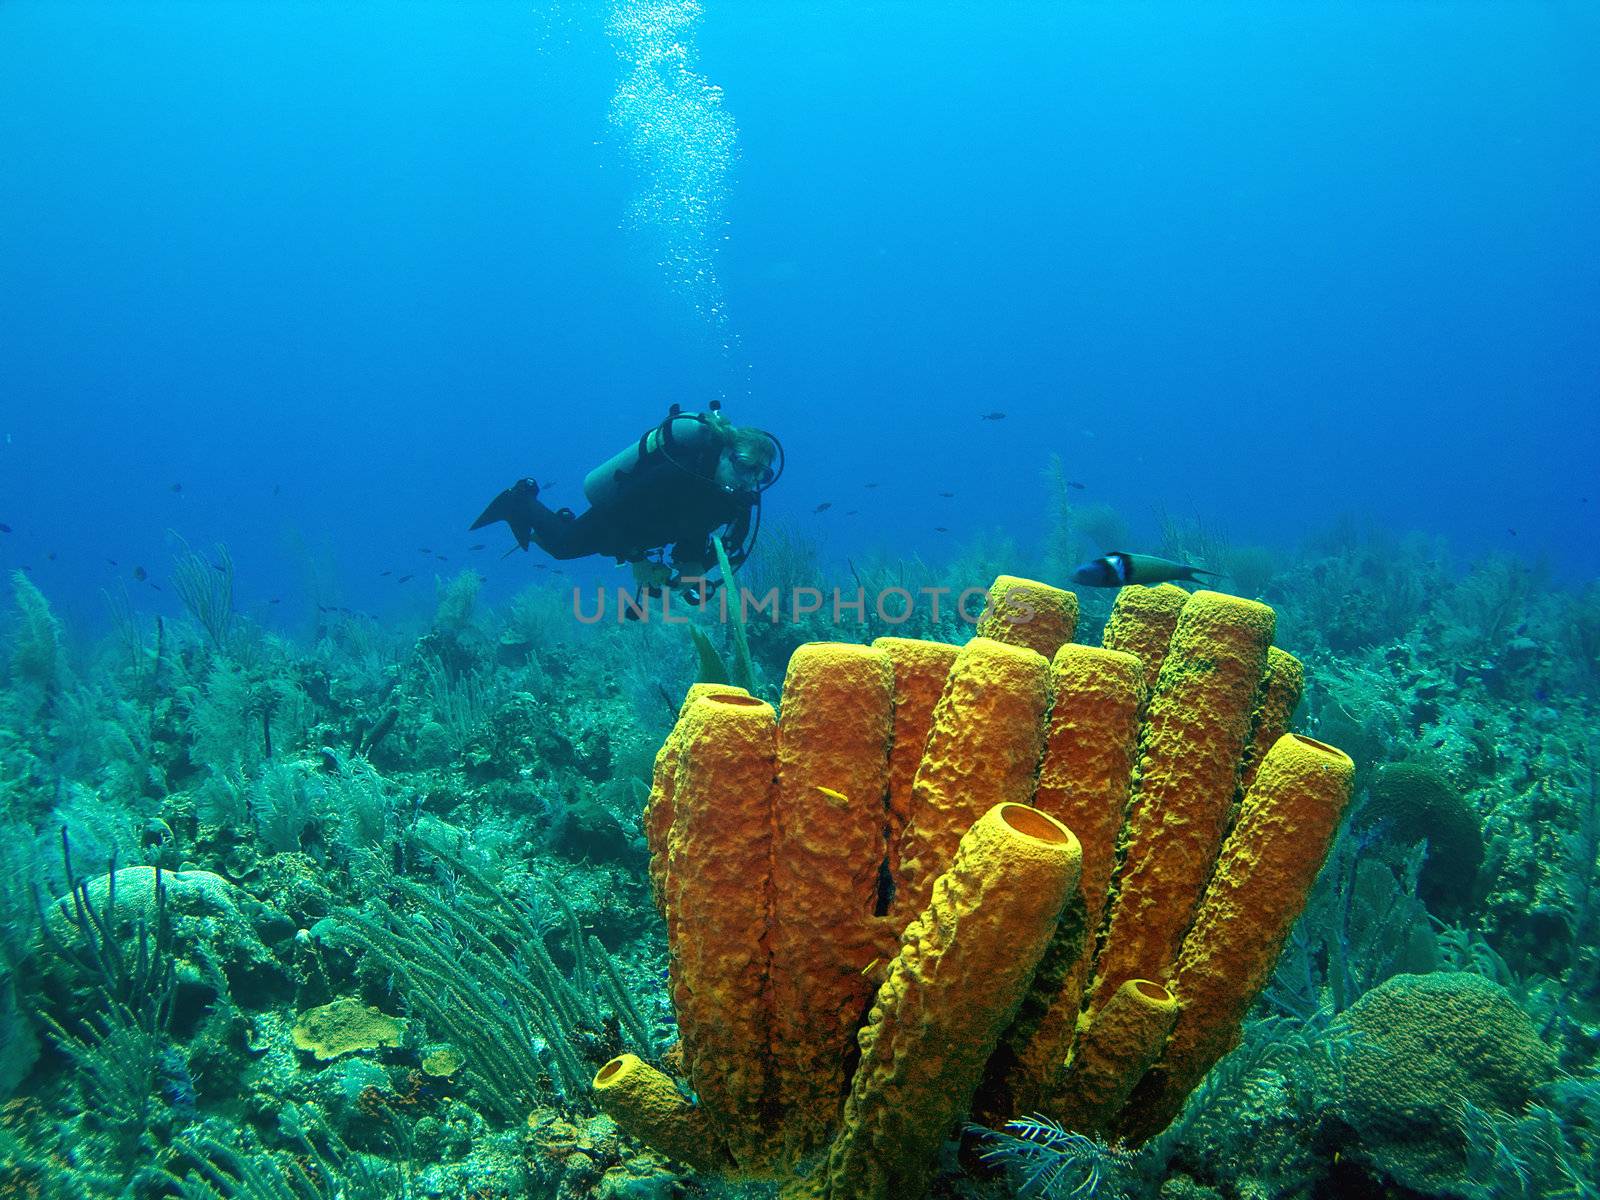 Scuba Diver and Yellow Tube Sponge by KevinPanizza